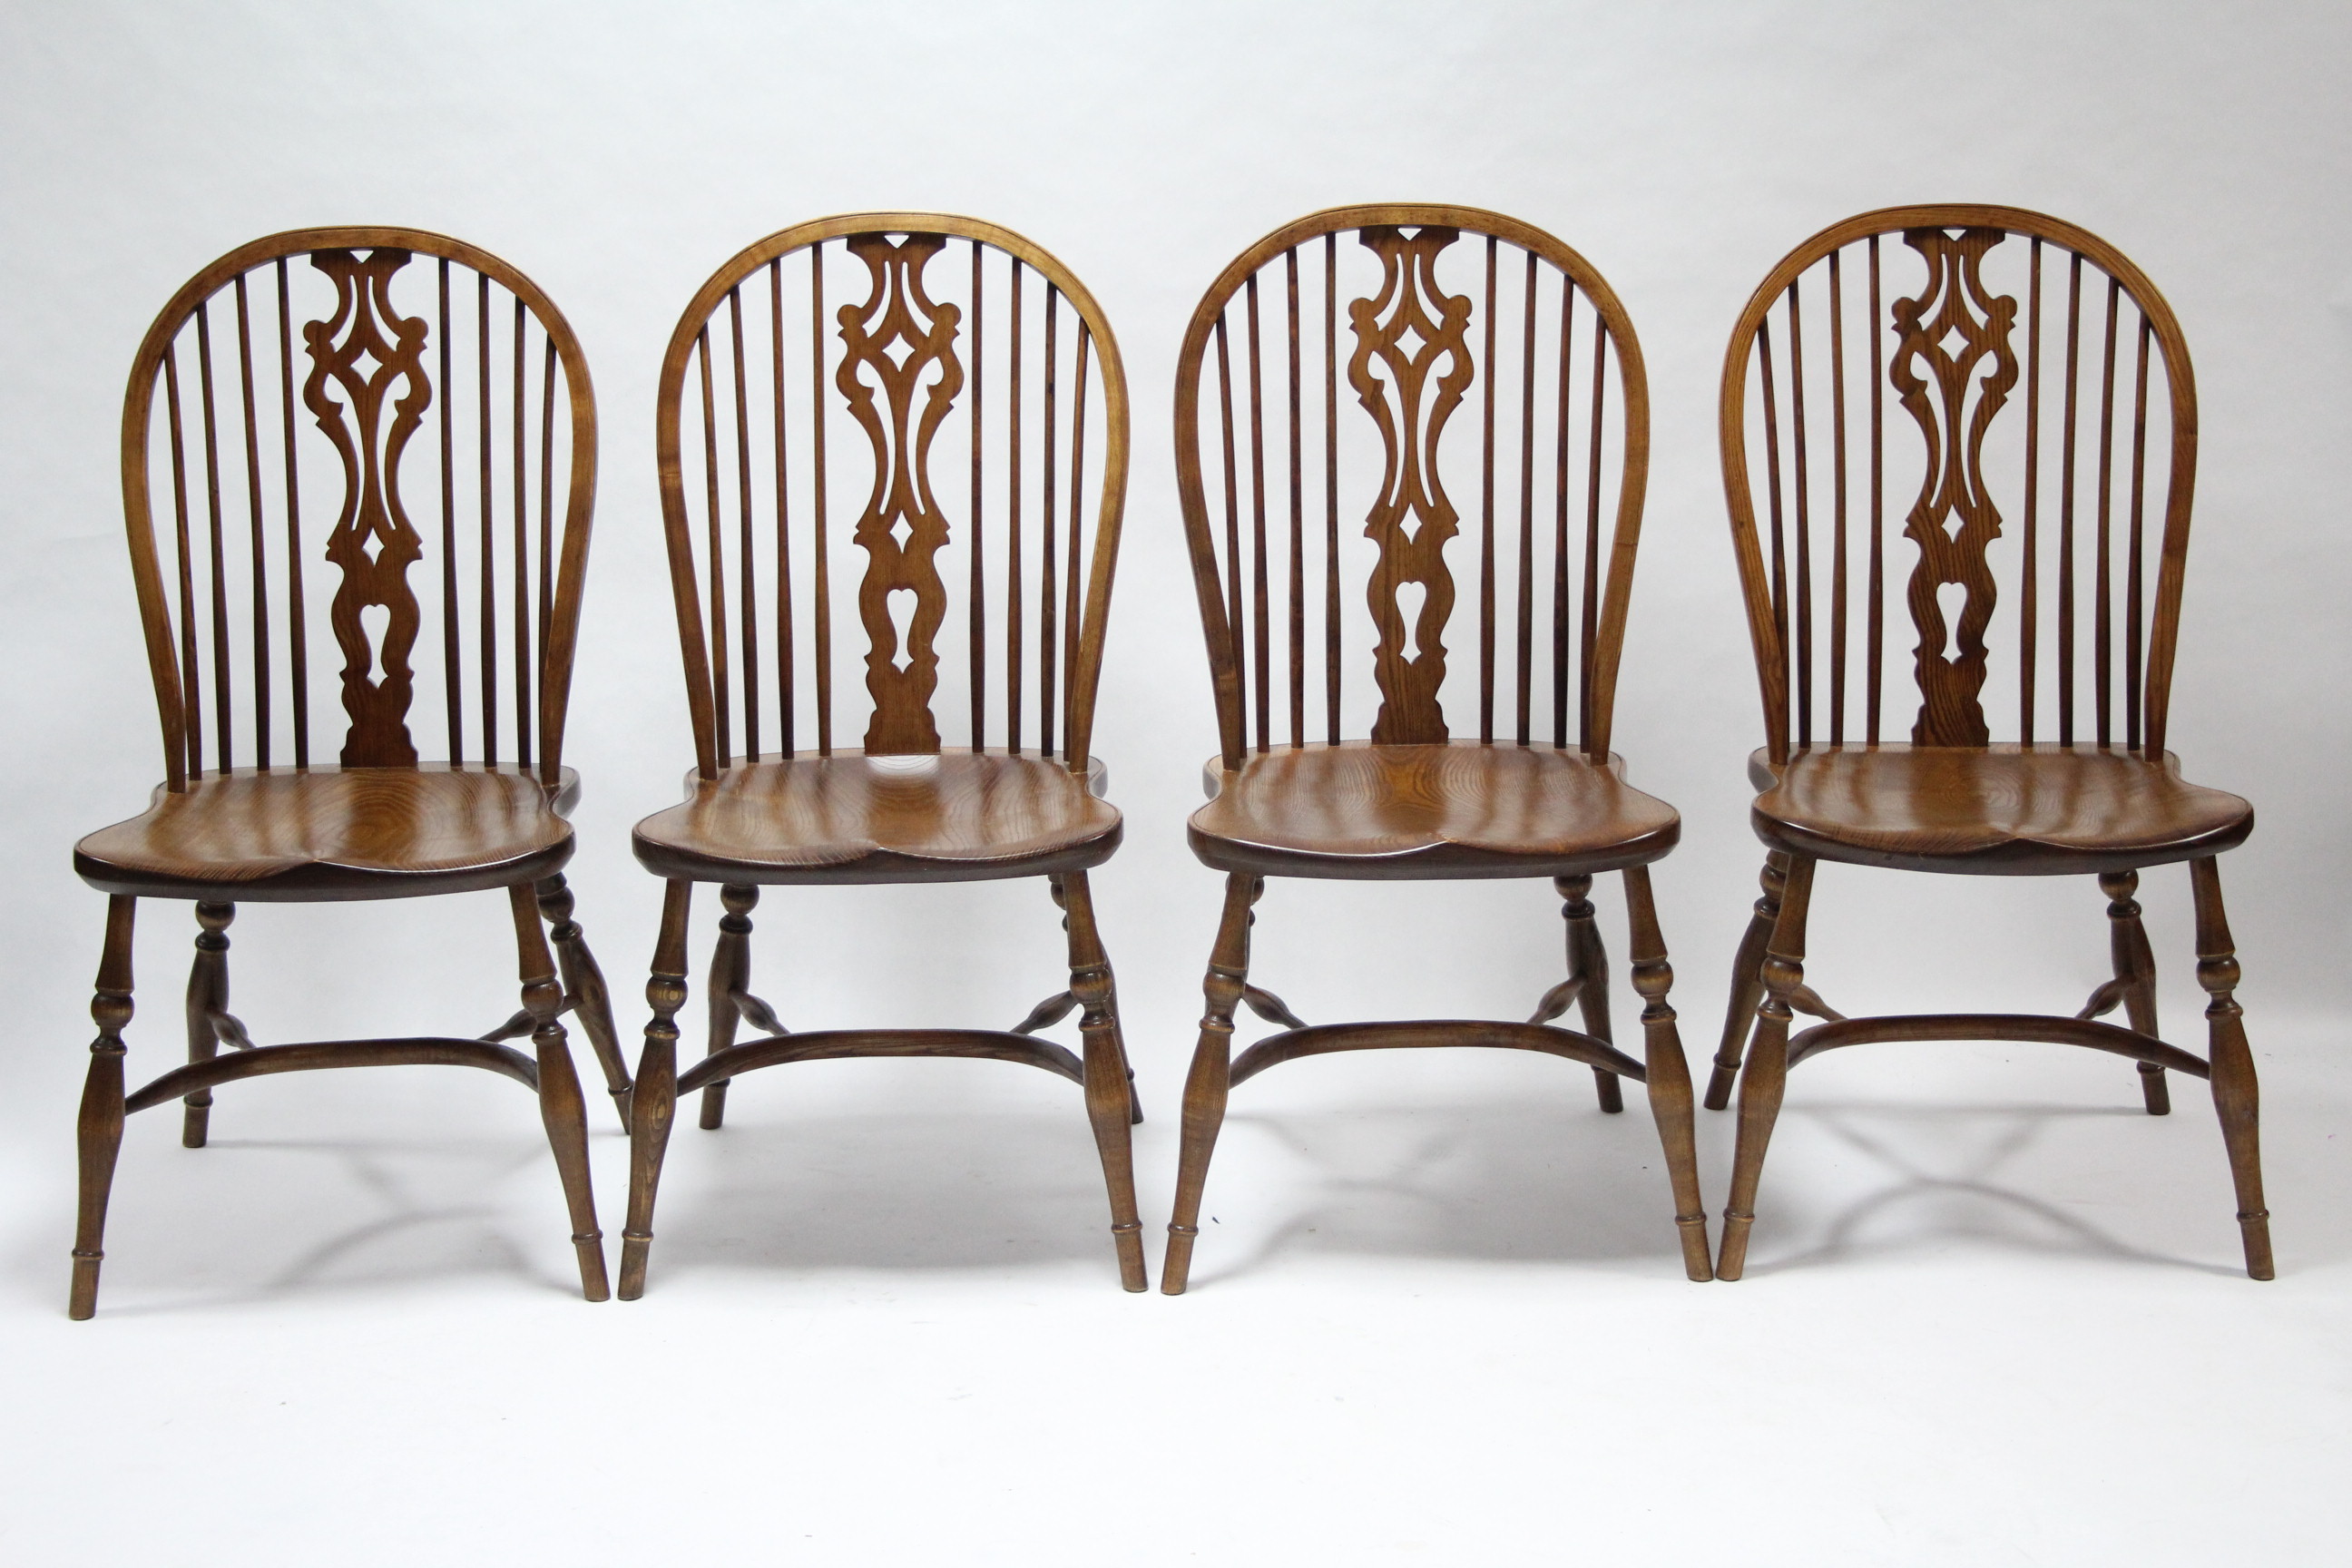 GOOD QUALITY SET OF SIX 19th CENTURY WINDSOR-STYLE DINING CHAIRS (including a pair of carvers), with - Image 2 of 7